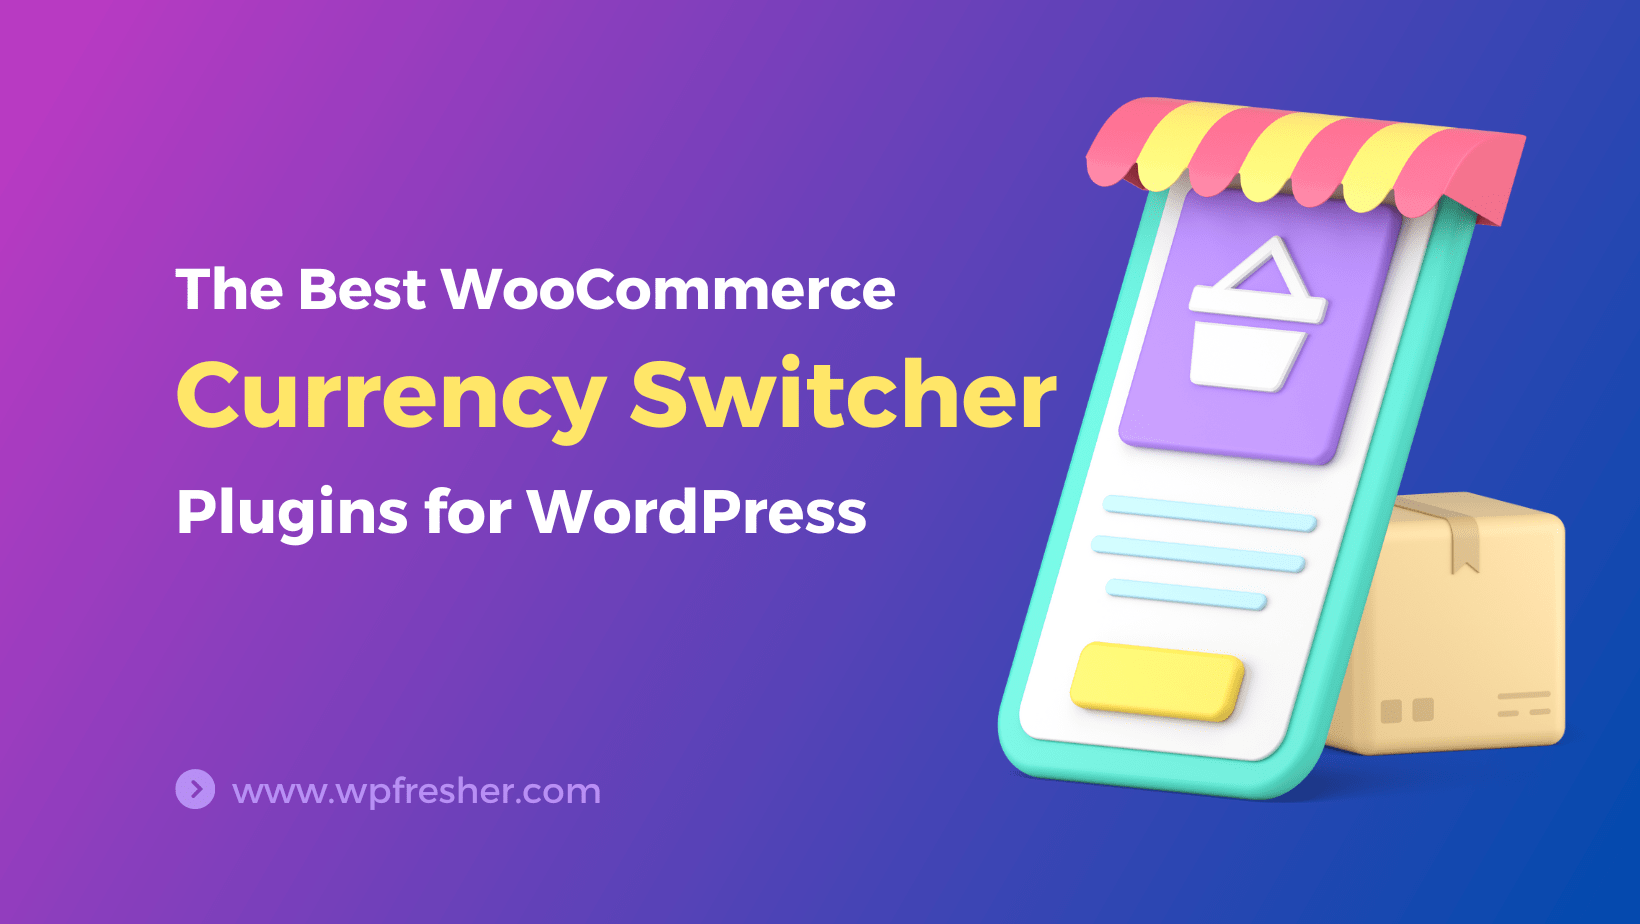 The Best WooCommerce Currency Switcher Plugins for WordPress Website